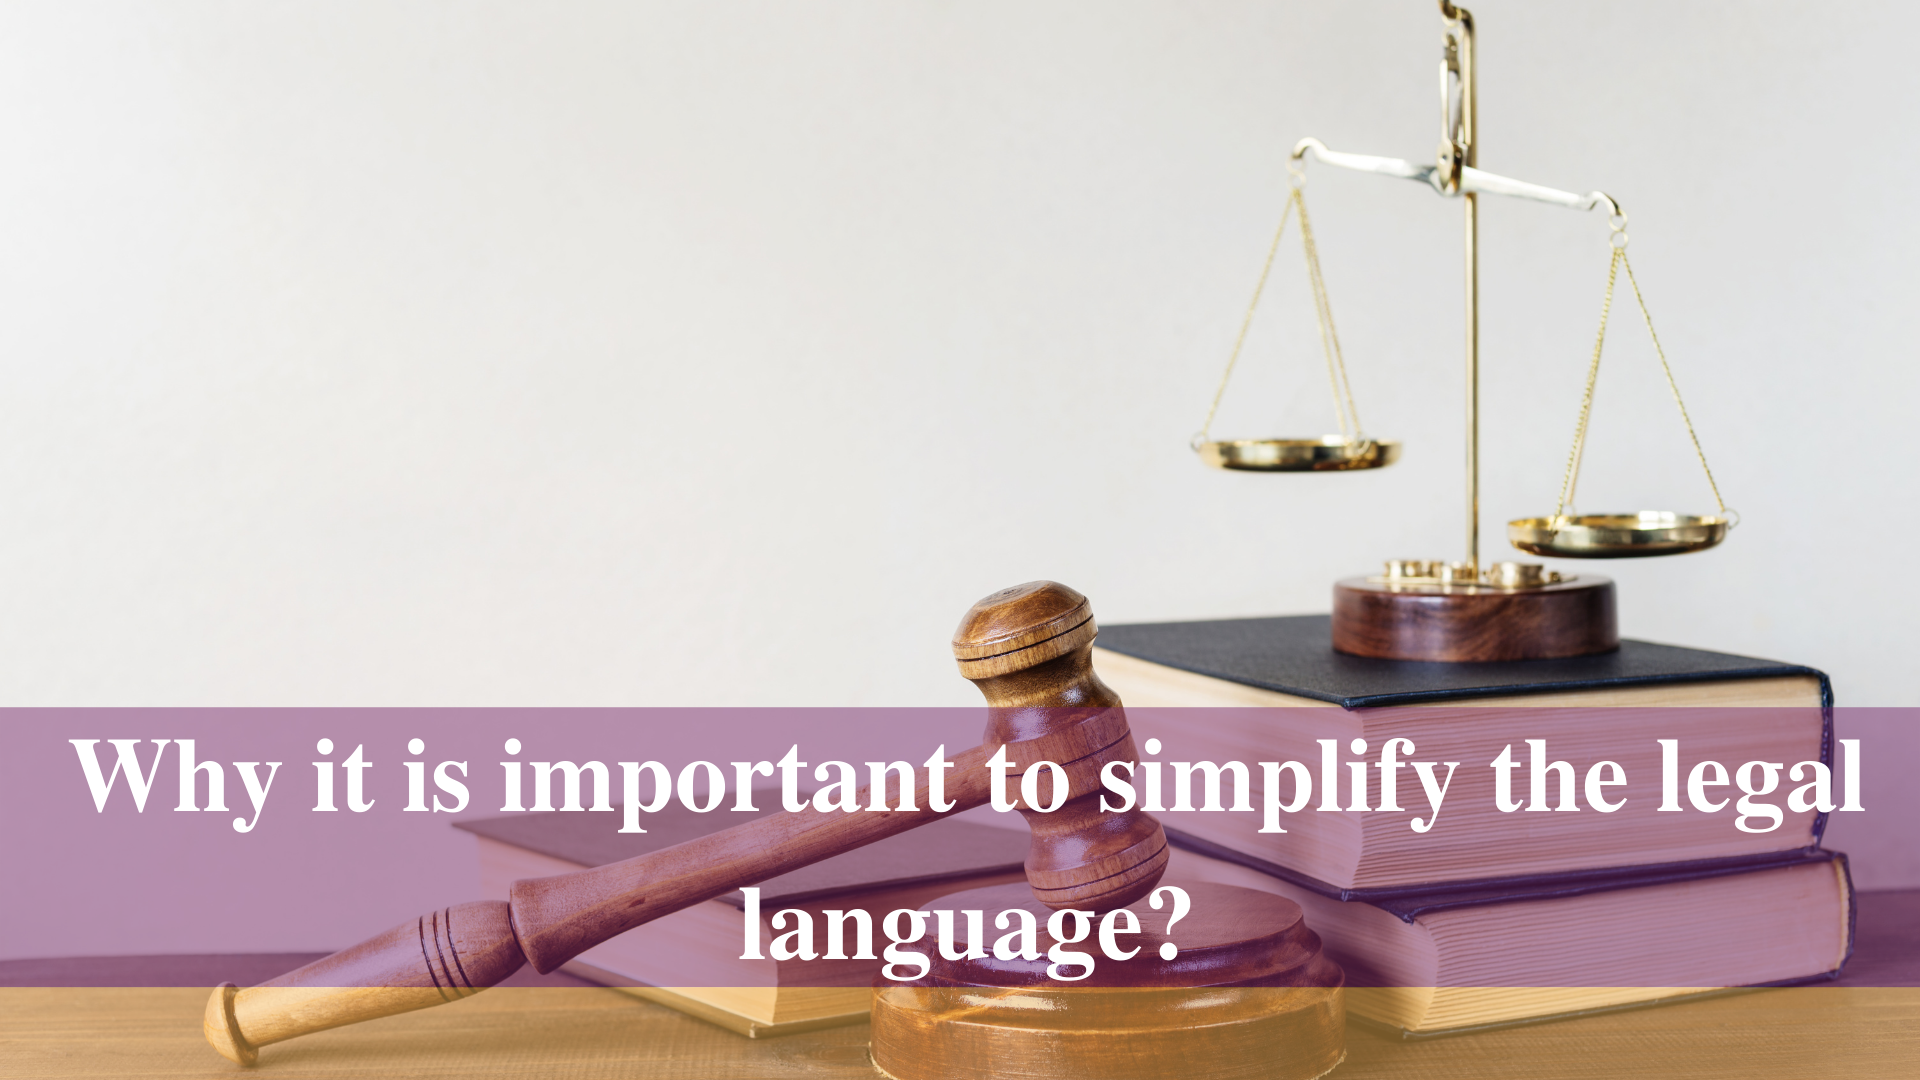 Why it is important to simplify the legal language